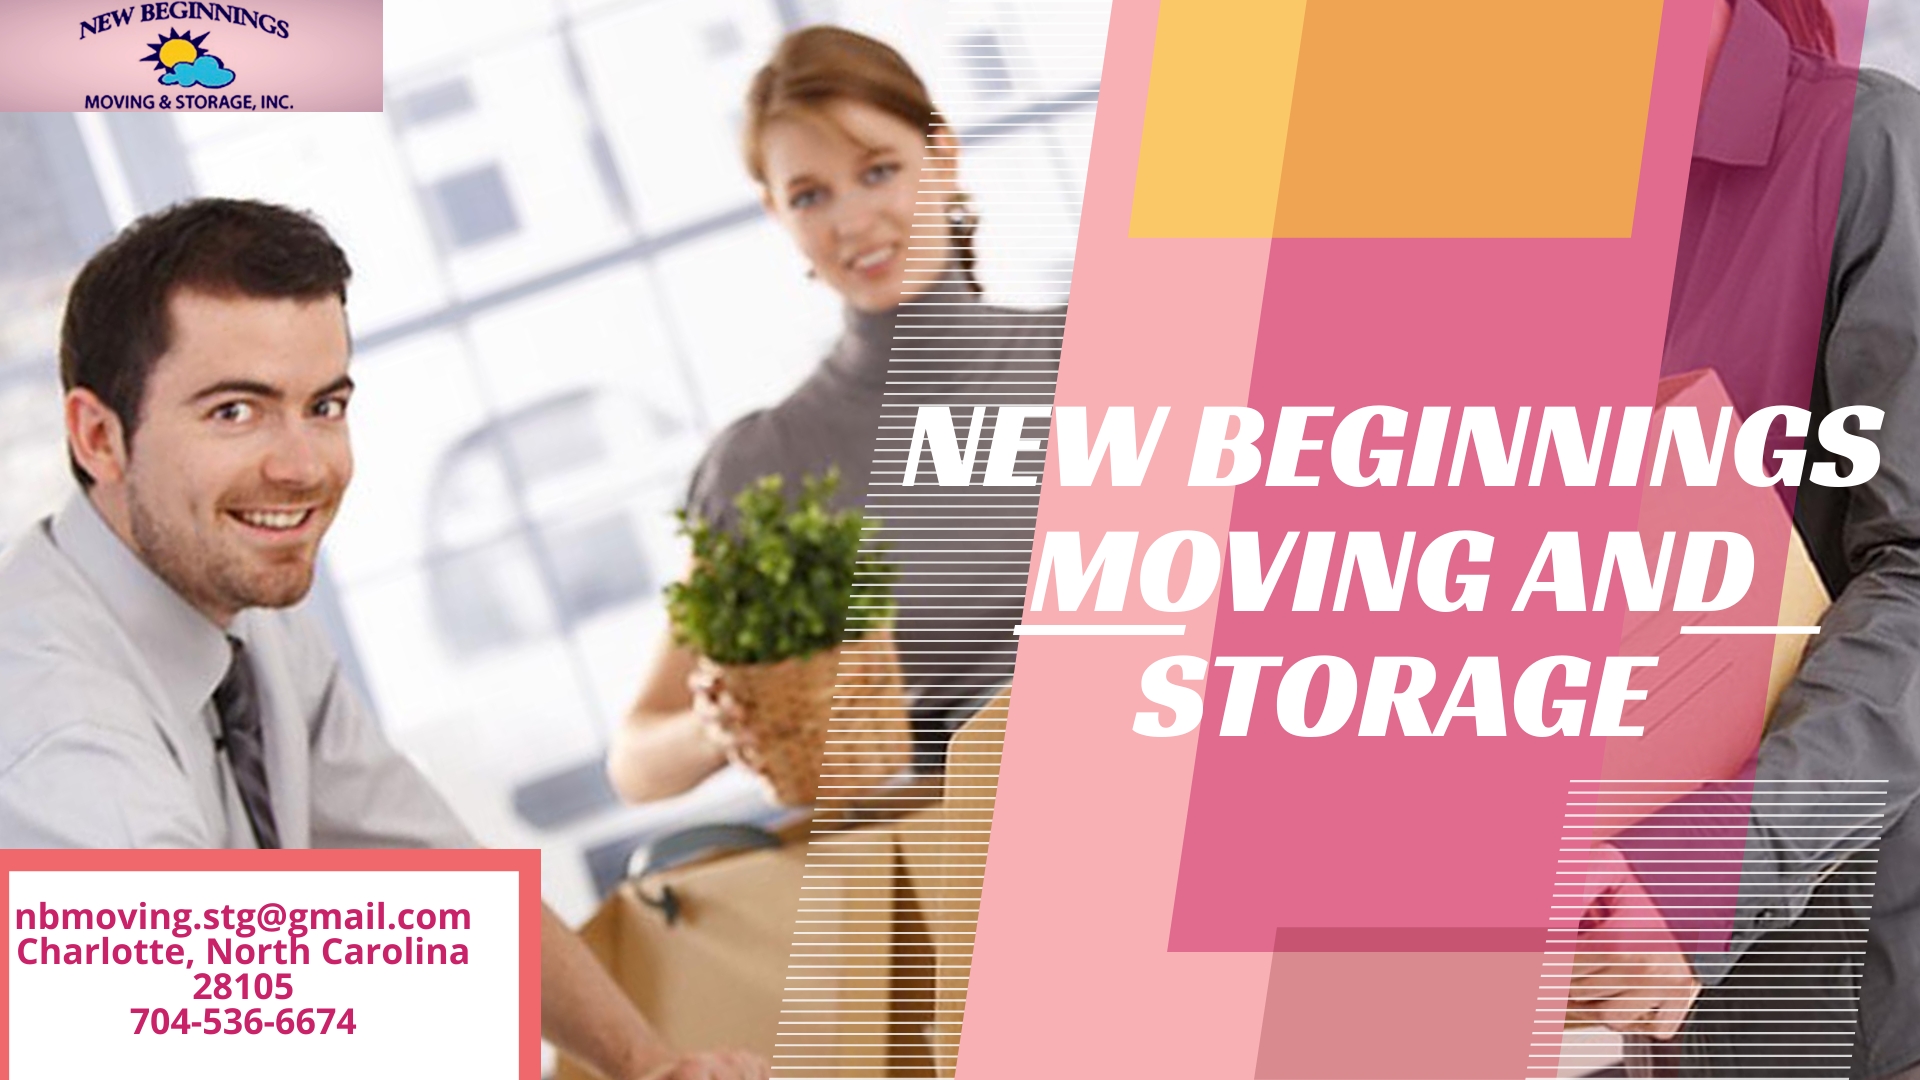 NEW BEGINNINGS MOVING AND STORAGE-Moving Companies Charlotte NC